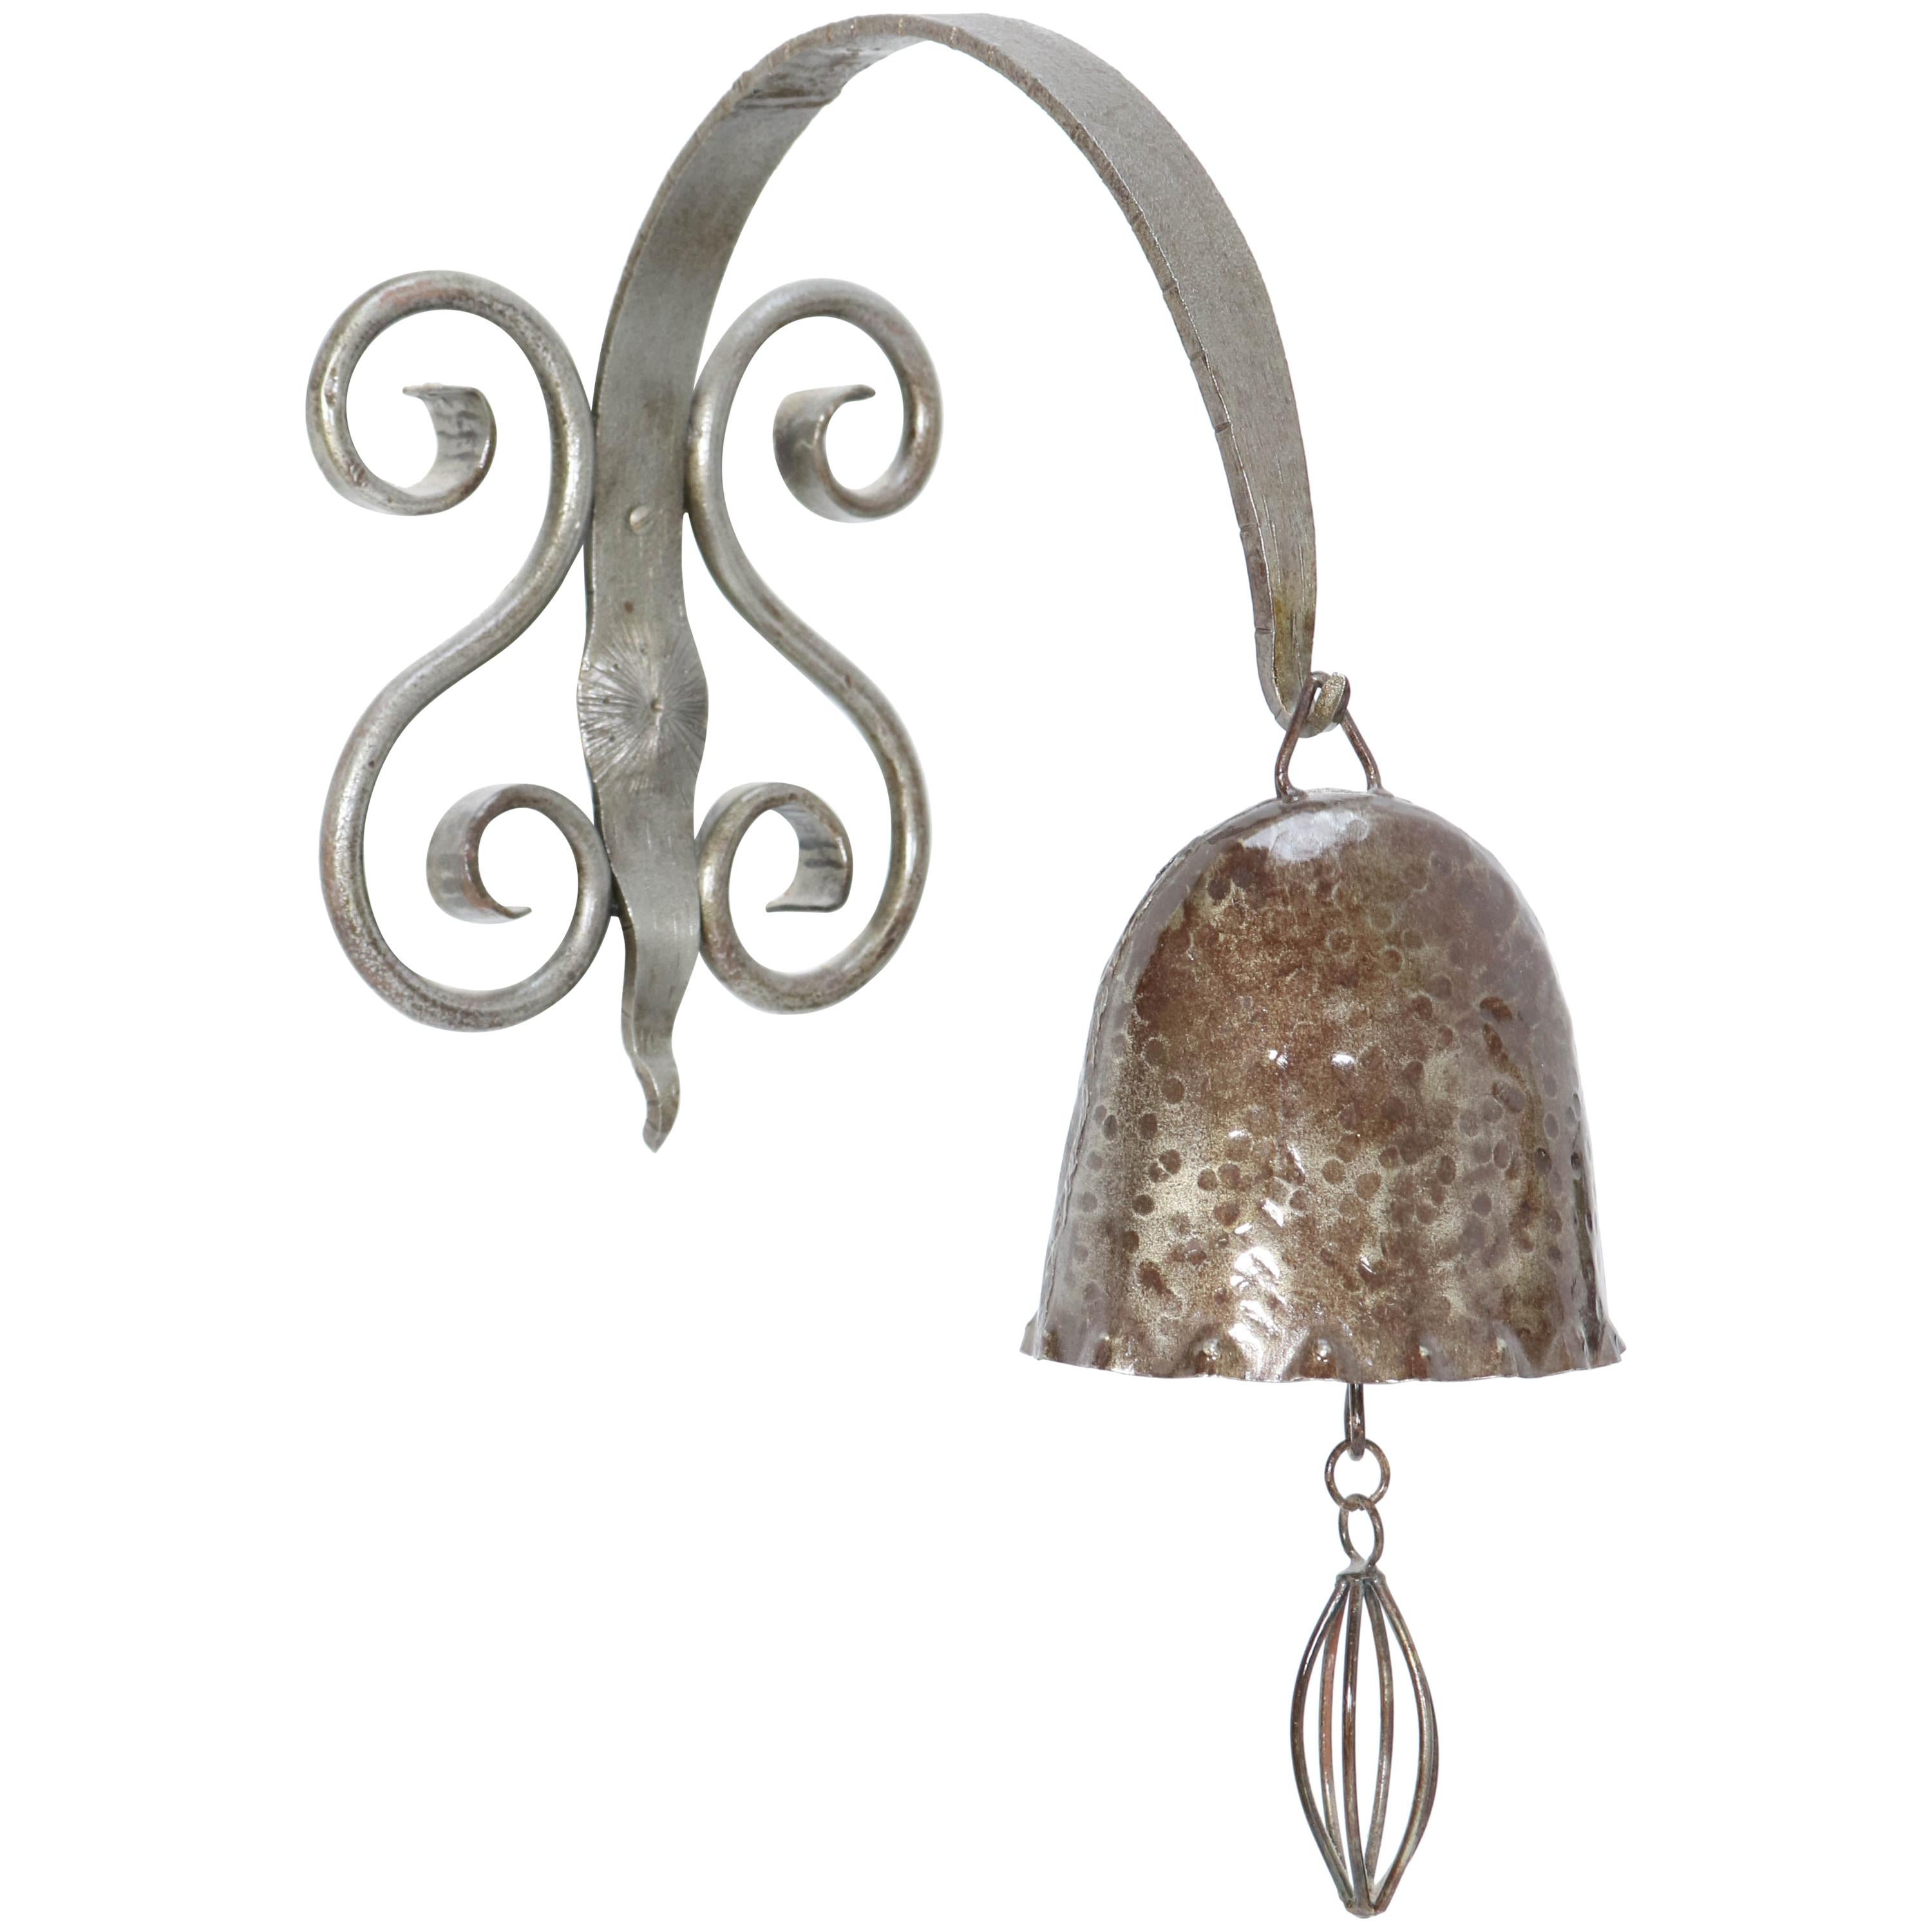 Patinated Wrought Iron Art Deco Amsterdam School Gong or Bell, 1930s For Sale